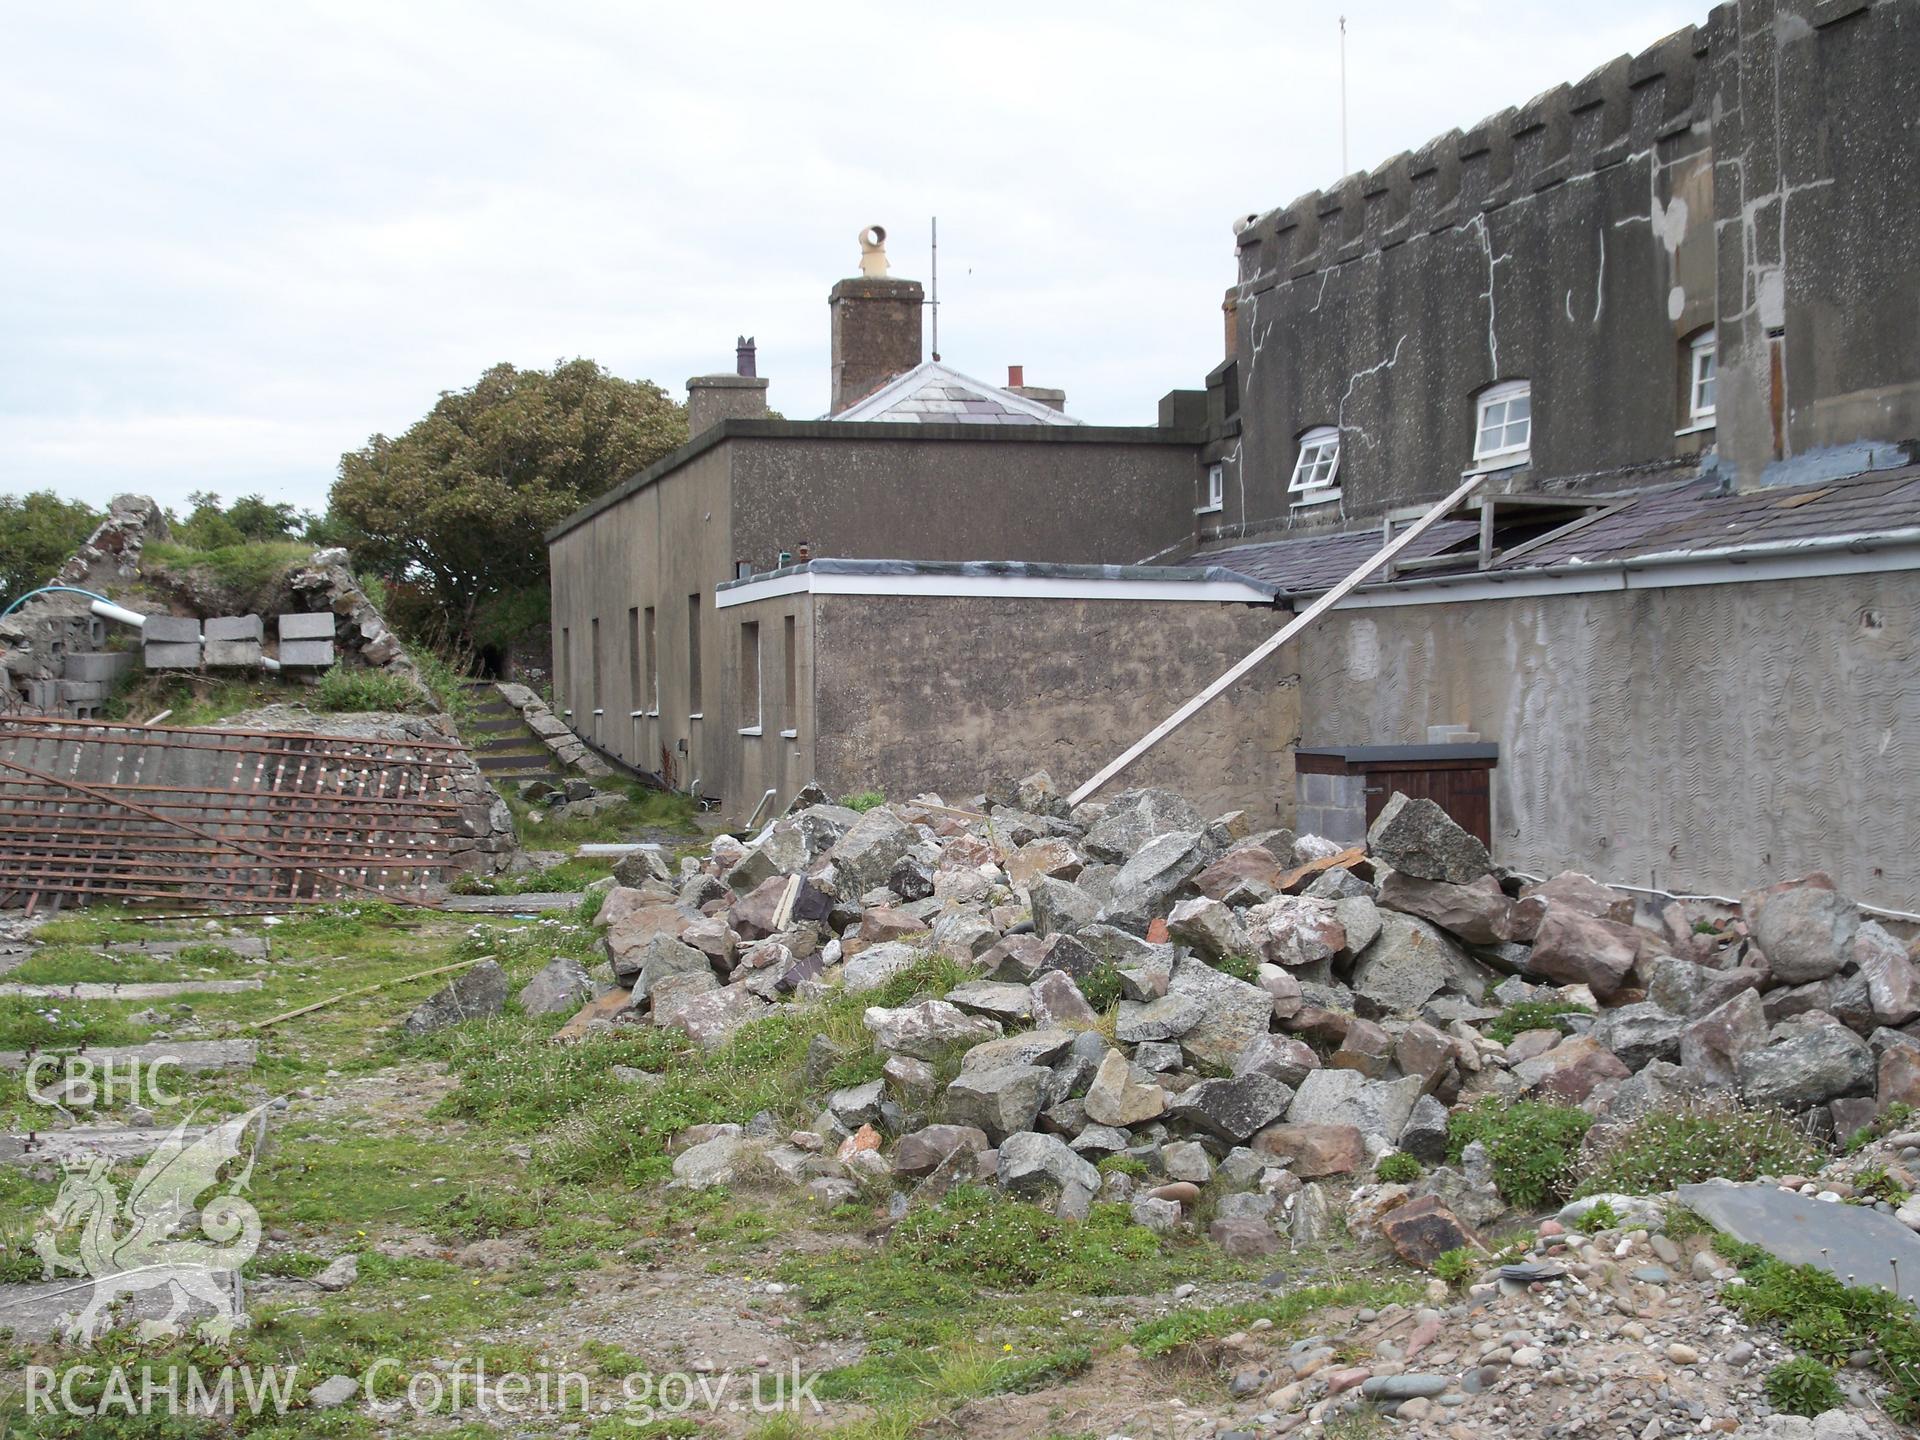 Demolition of more modern additions on the west side of the fort